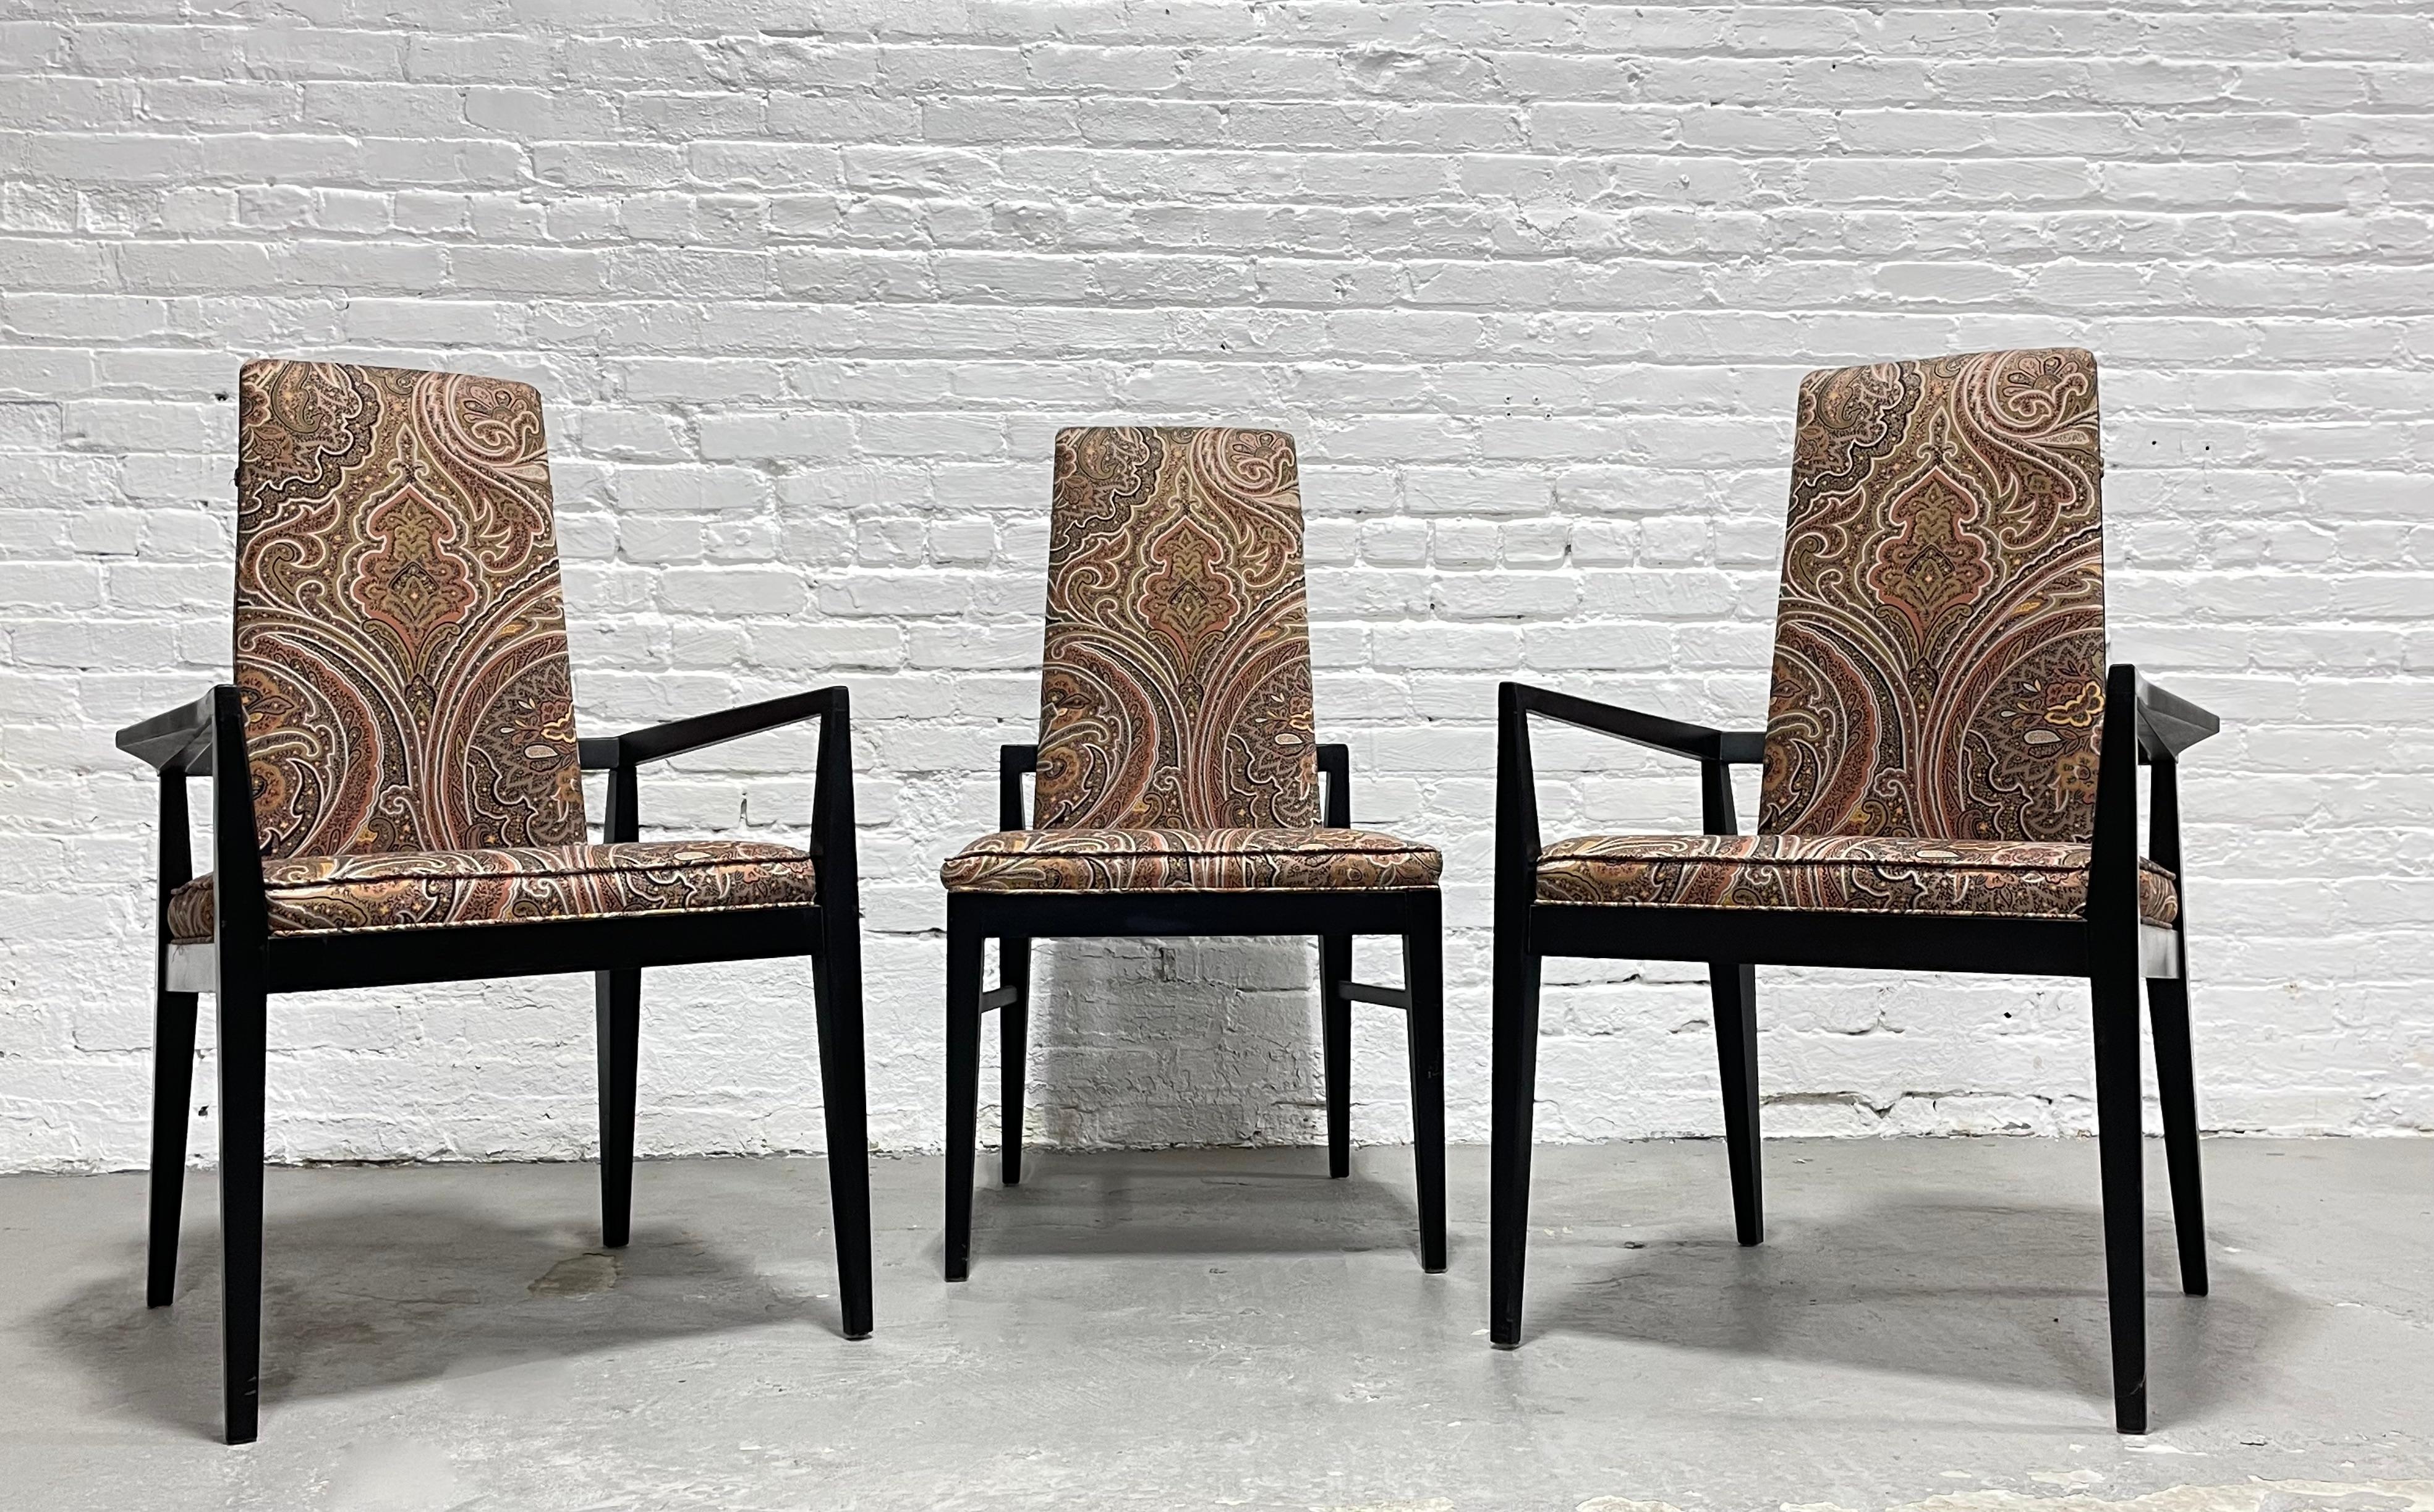 Incredible set of three Mid-Century Modern ebonized chairs in the most perfect paisley upholstery. The backs are framed out and absolutely lovely with black frames and gorgeous design. These chairs are showstoppers and would be perfect as captain